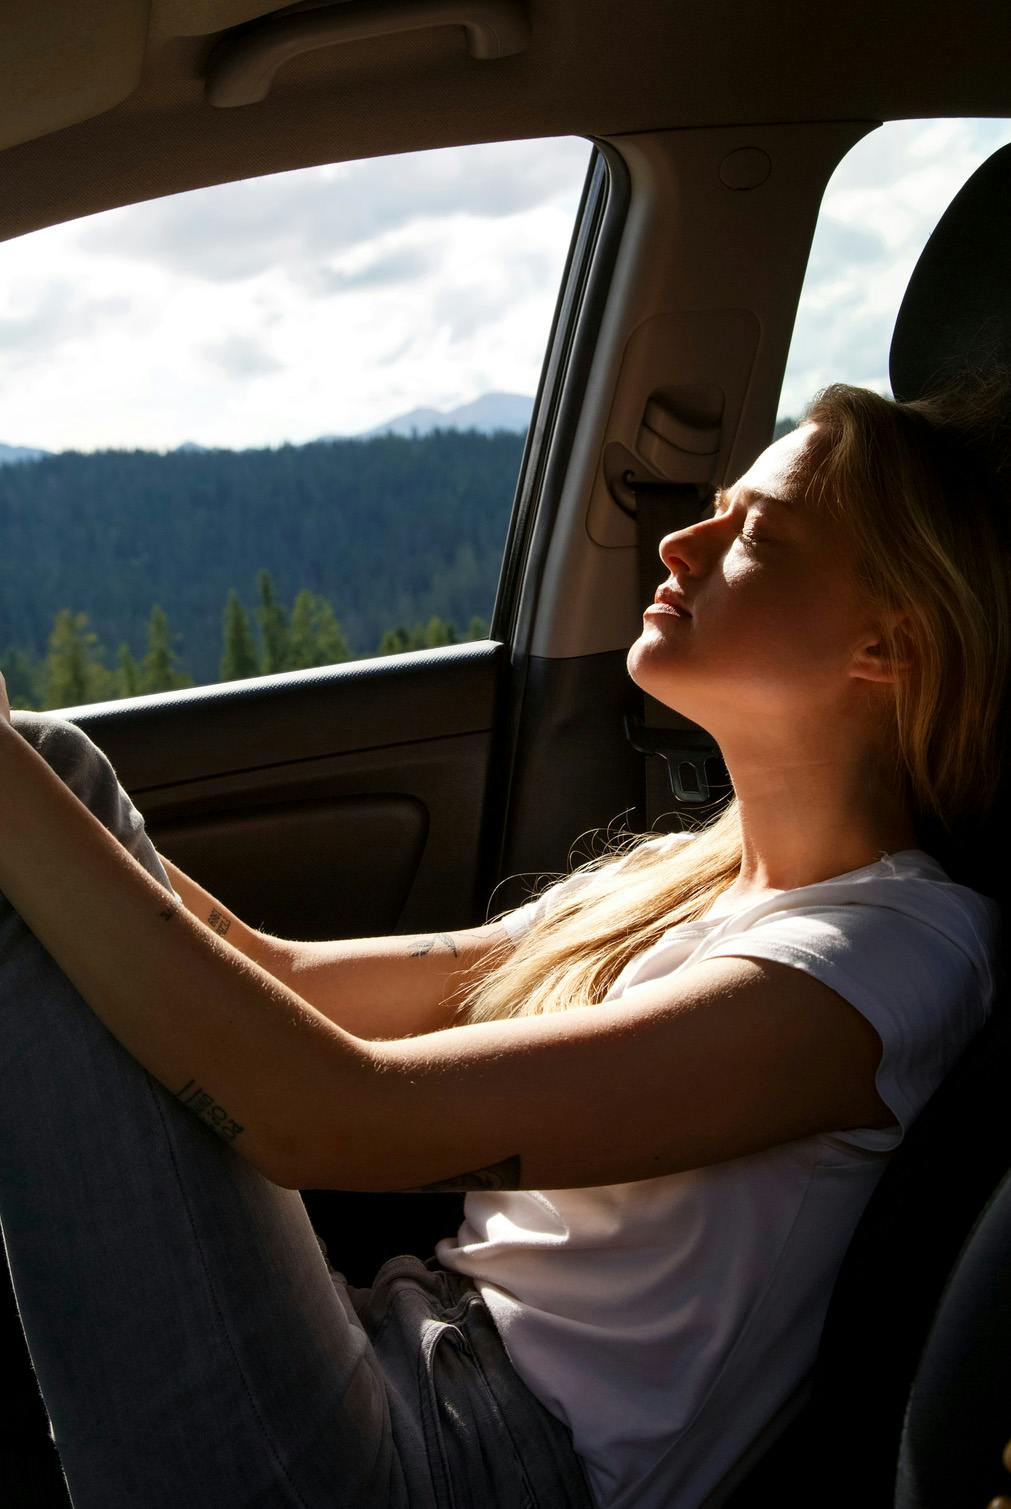 Woman in passenger seat of car with her head tilted back eyes closed. Sun is streaming onto her face and body. Outside the opened car window are mountainous forests.